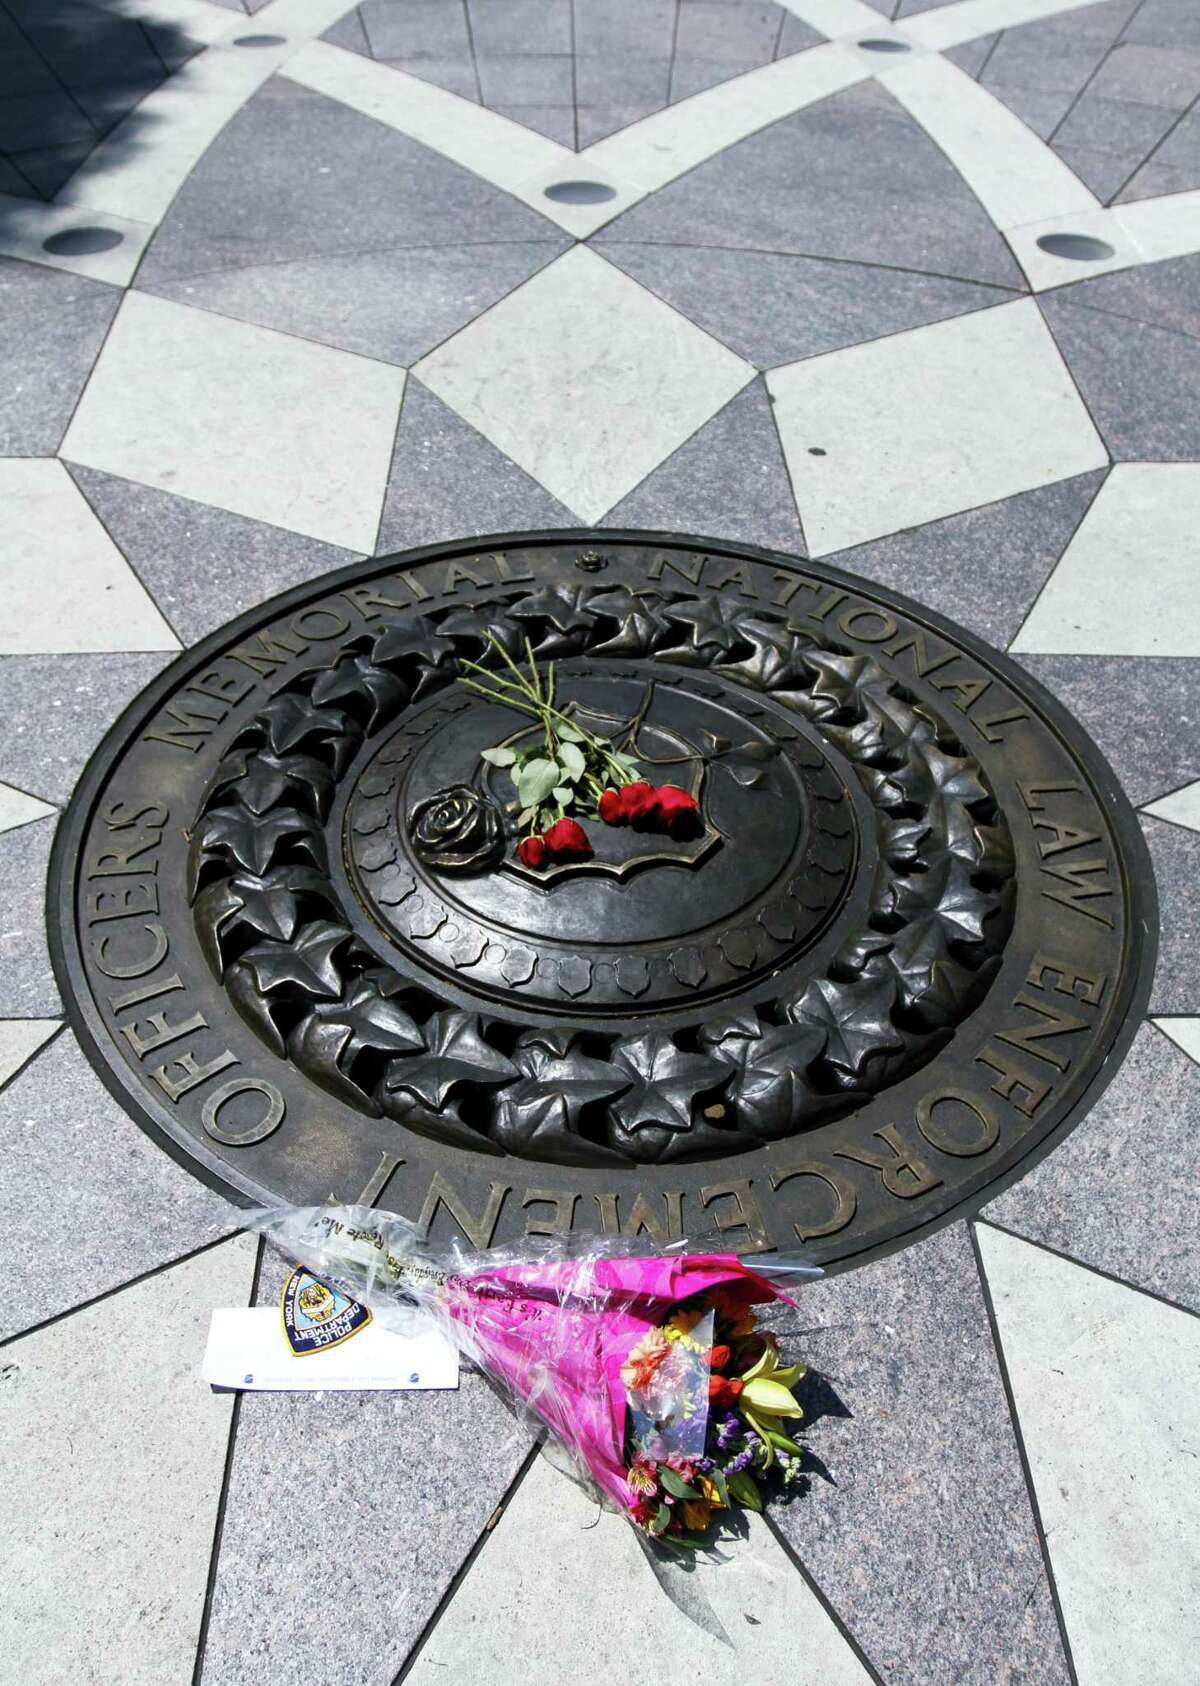 Five red roses and a bouquet of flowers with a note of support for the Dallas Police Department lies on the bronze medallion at the National Law Enforcement Officers Memorial in Washington, Friday, July 8, 2016. Five officers were killed in Dallas on Thursday.